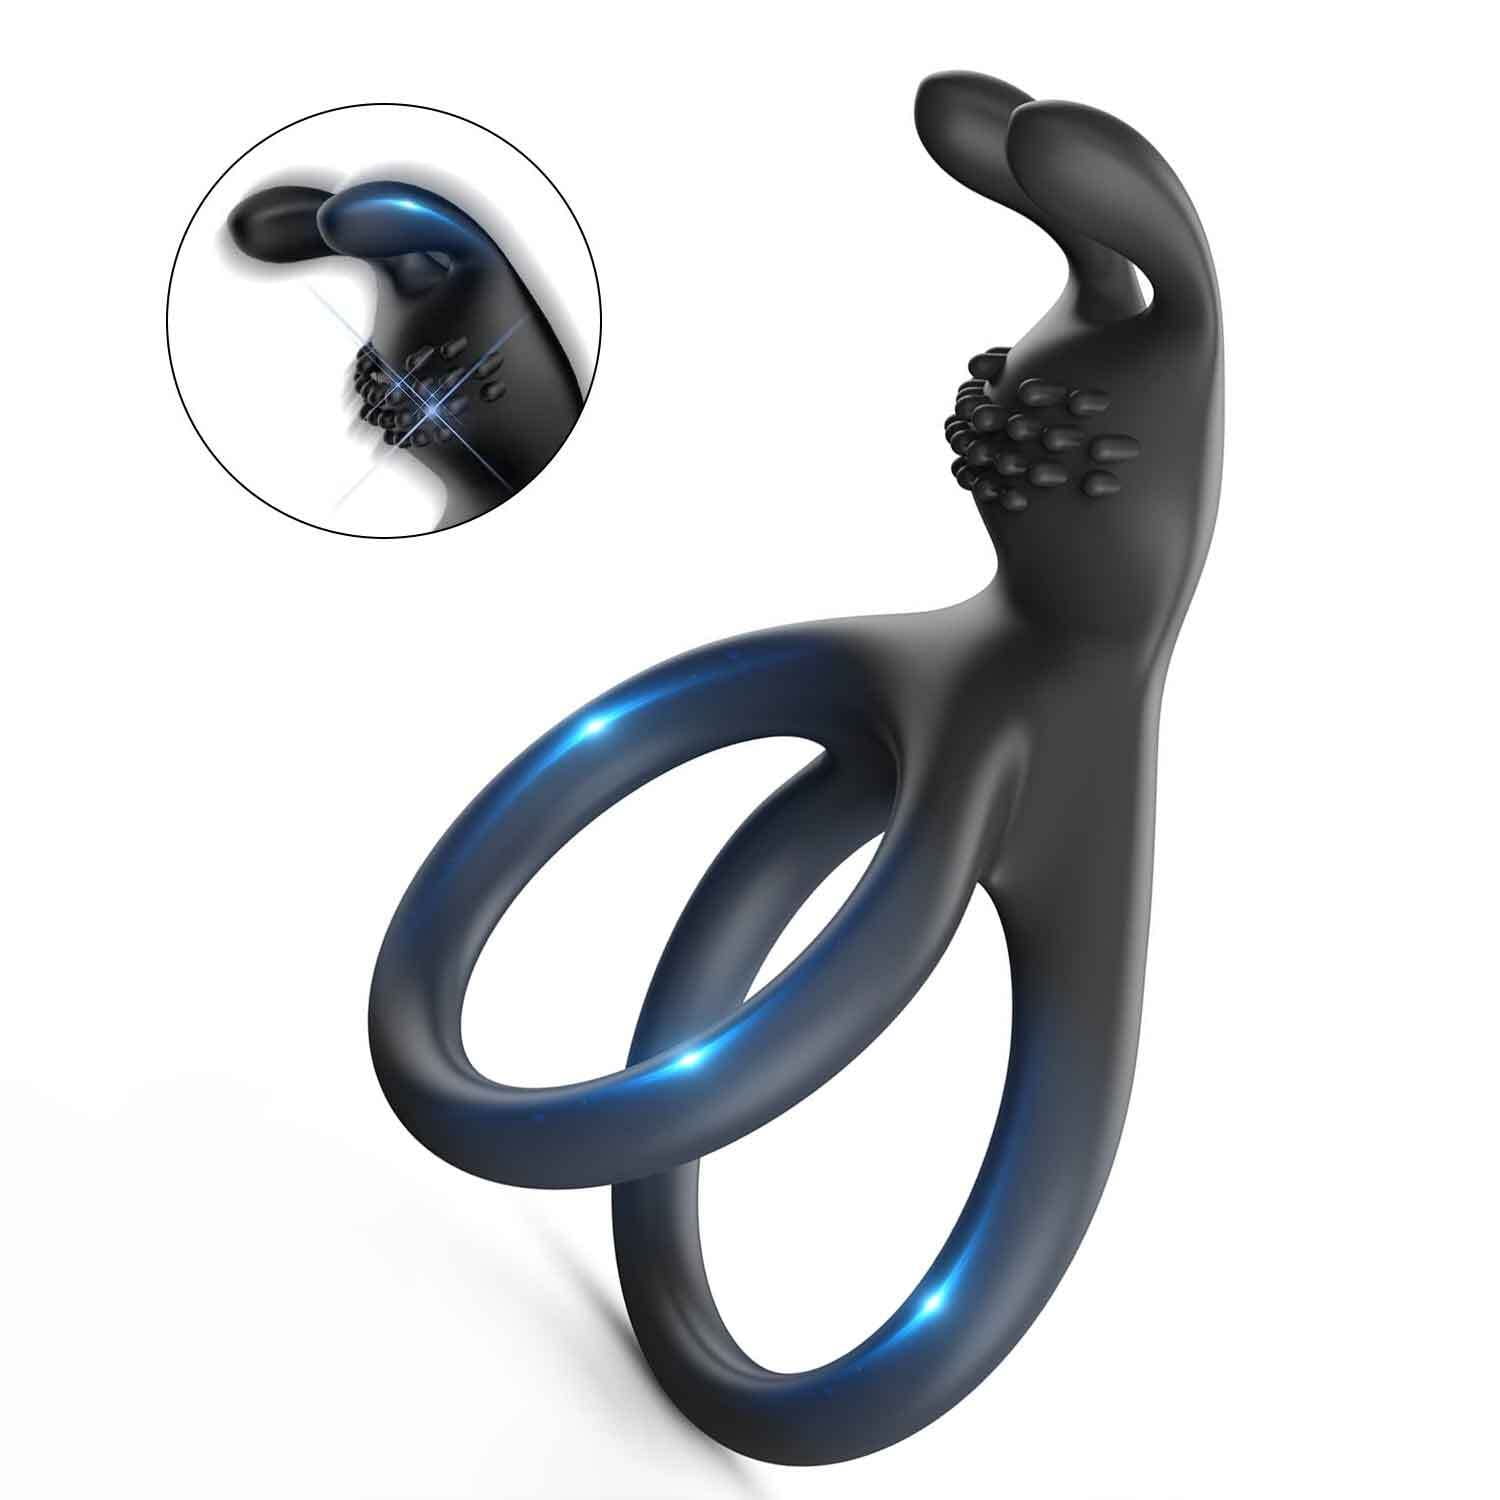 Areskey Silicone Dual Penis Ring, Male Stretchy Rabbit Head Support Ring, Sex Toy for Men or Couples